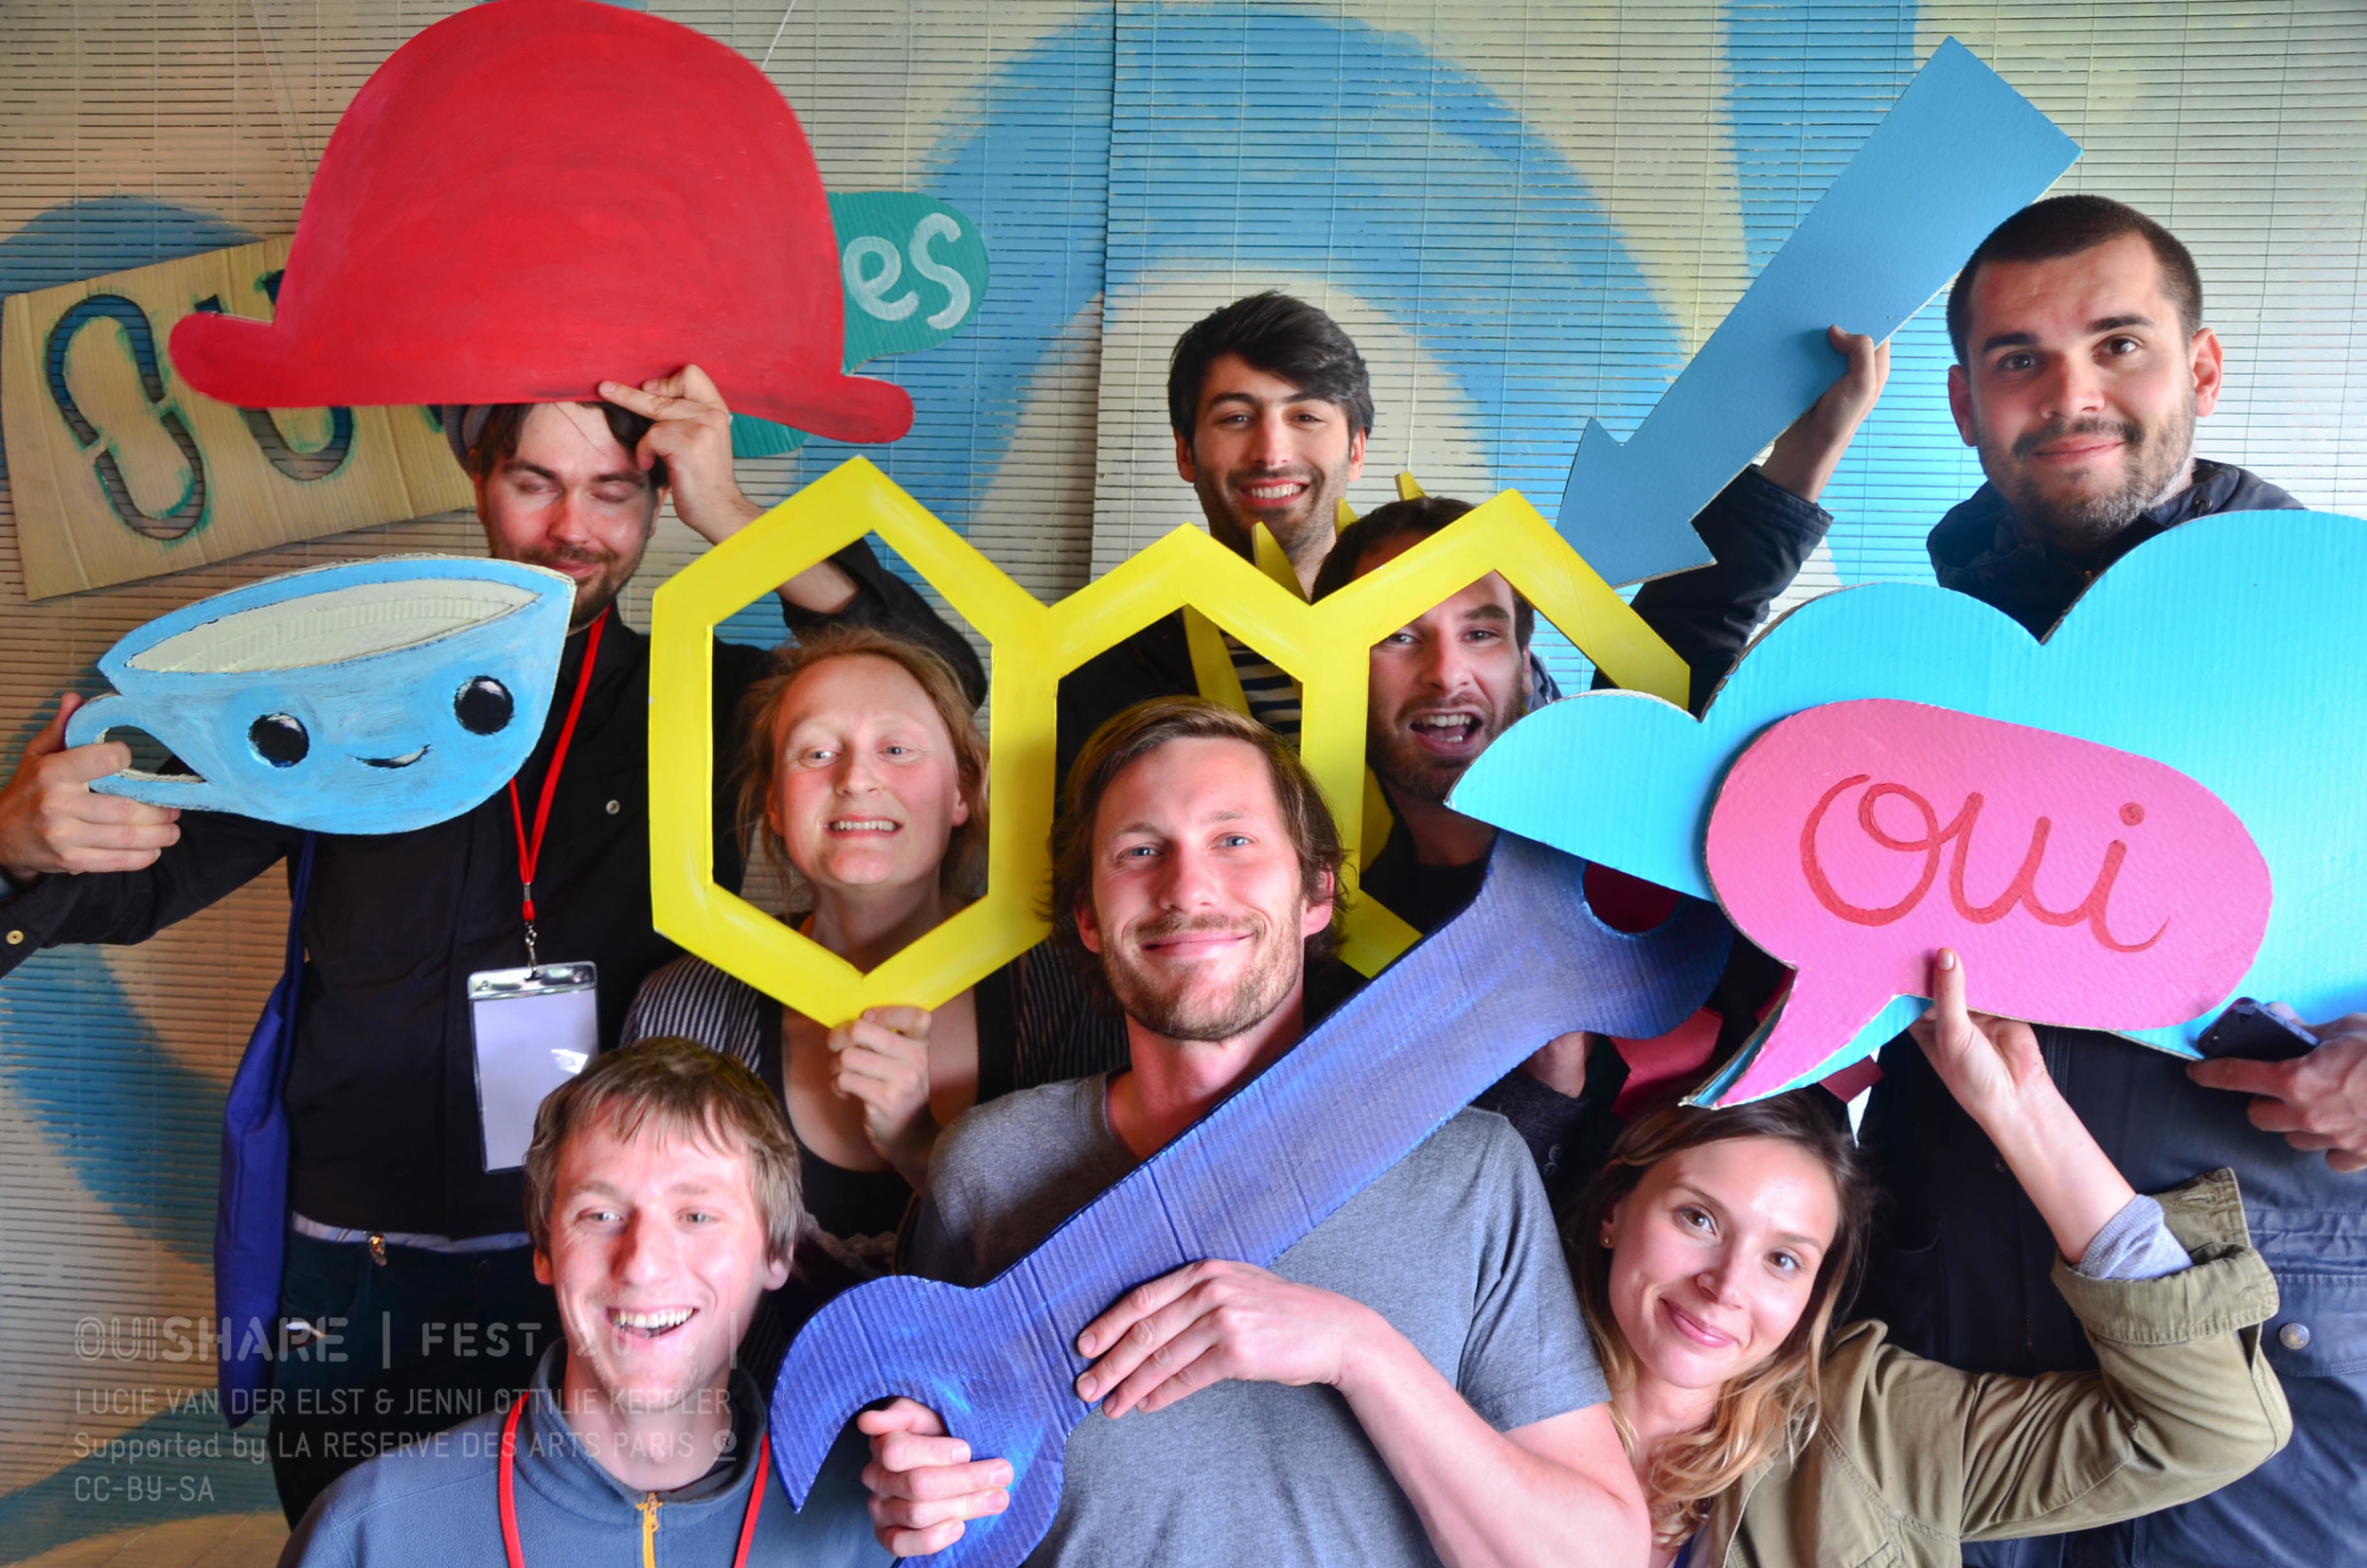 The Open Source Hardware Crew gathering for a picture in the OUIShapes Photo Booth